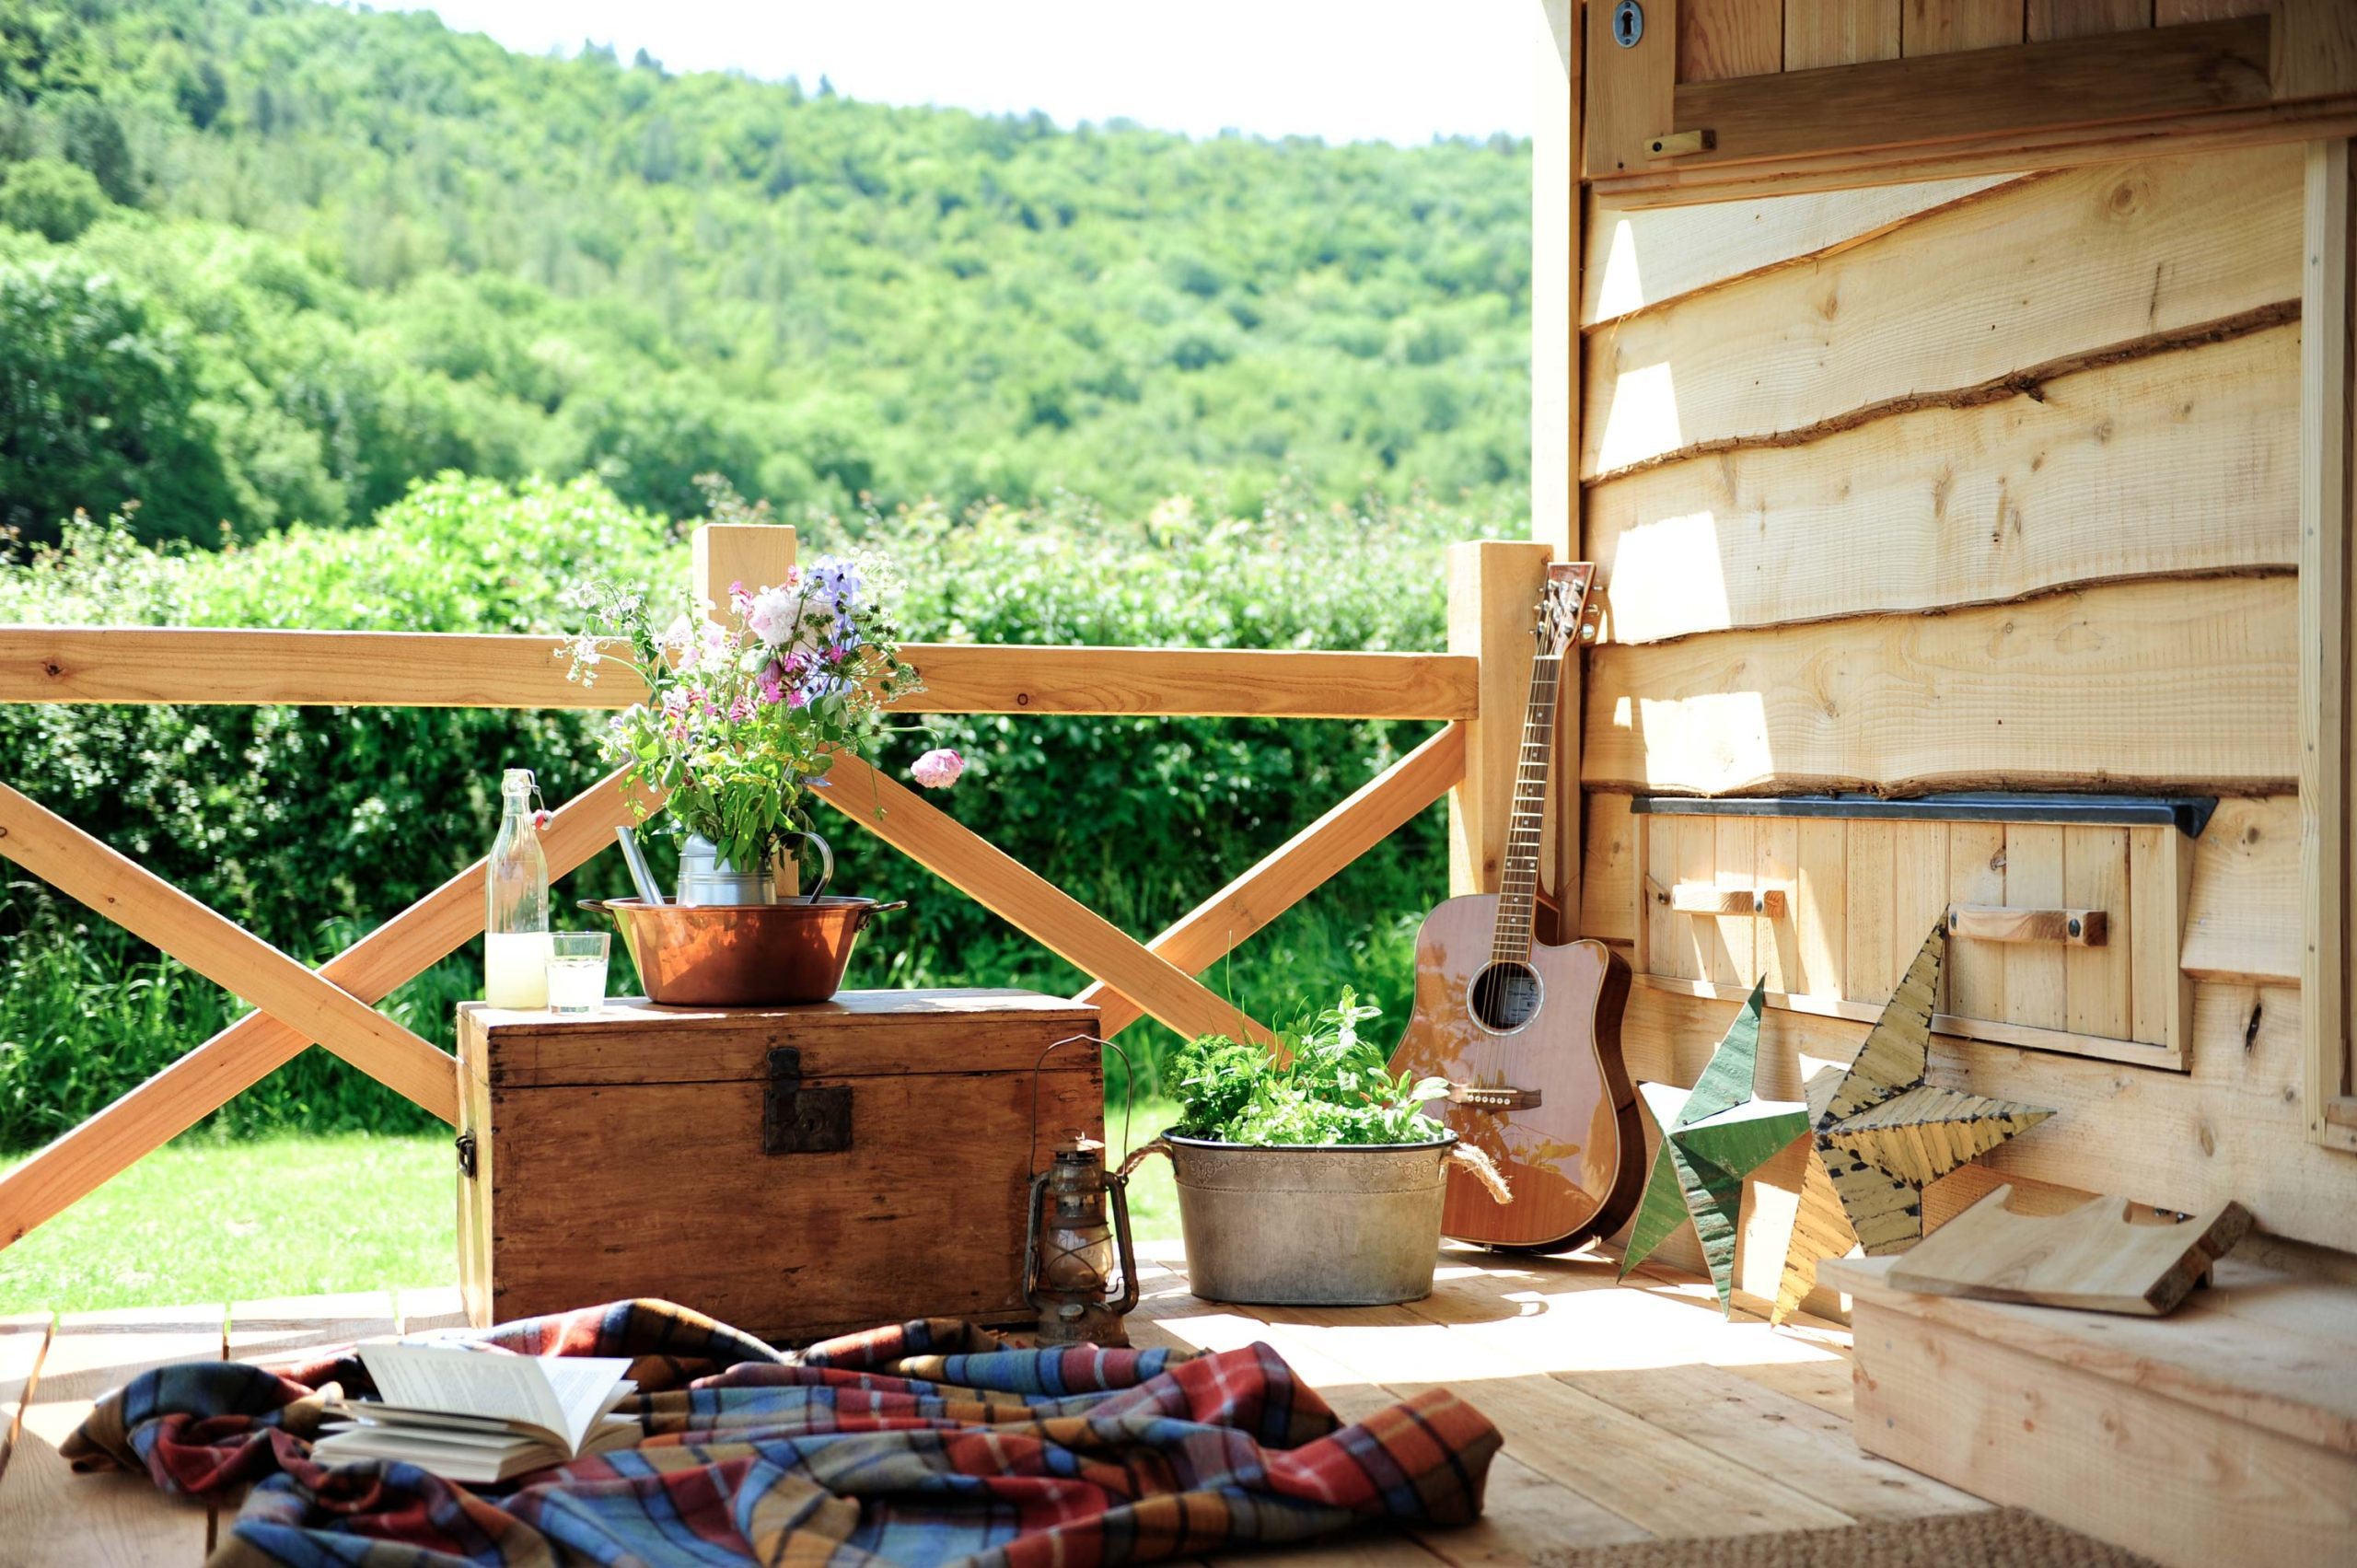 A blanket on the floor of the cabin porch at Loose Reins with a guitar fresh flowers and a herb planter